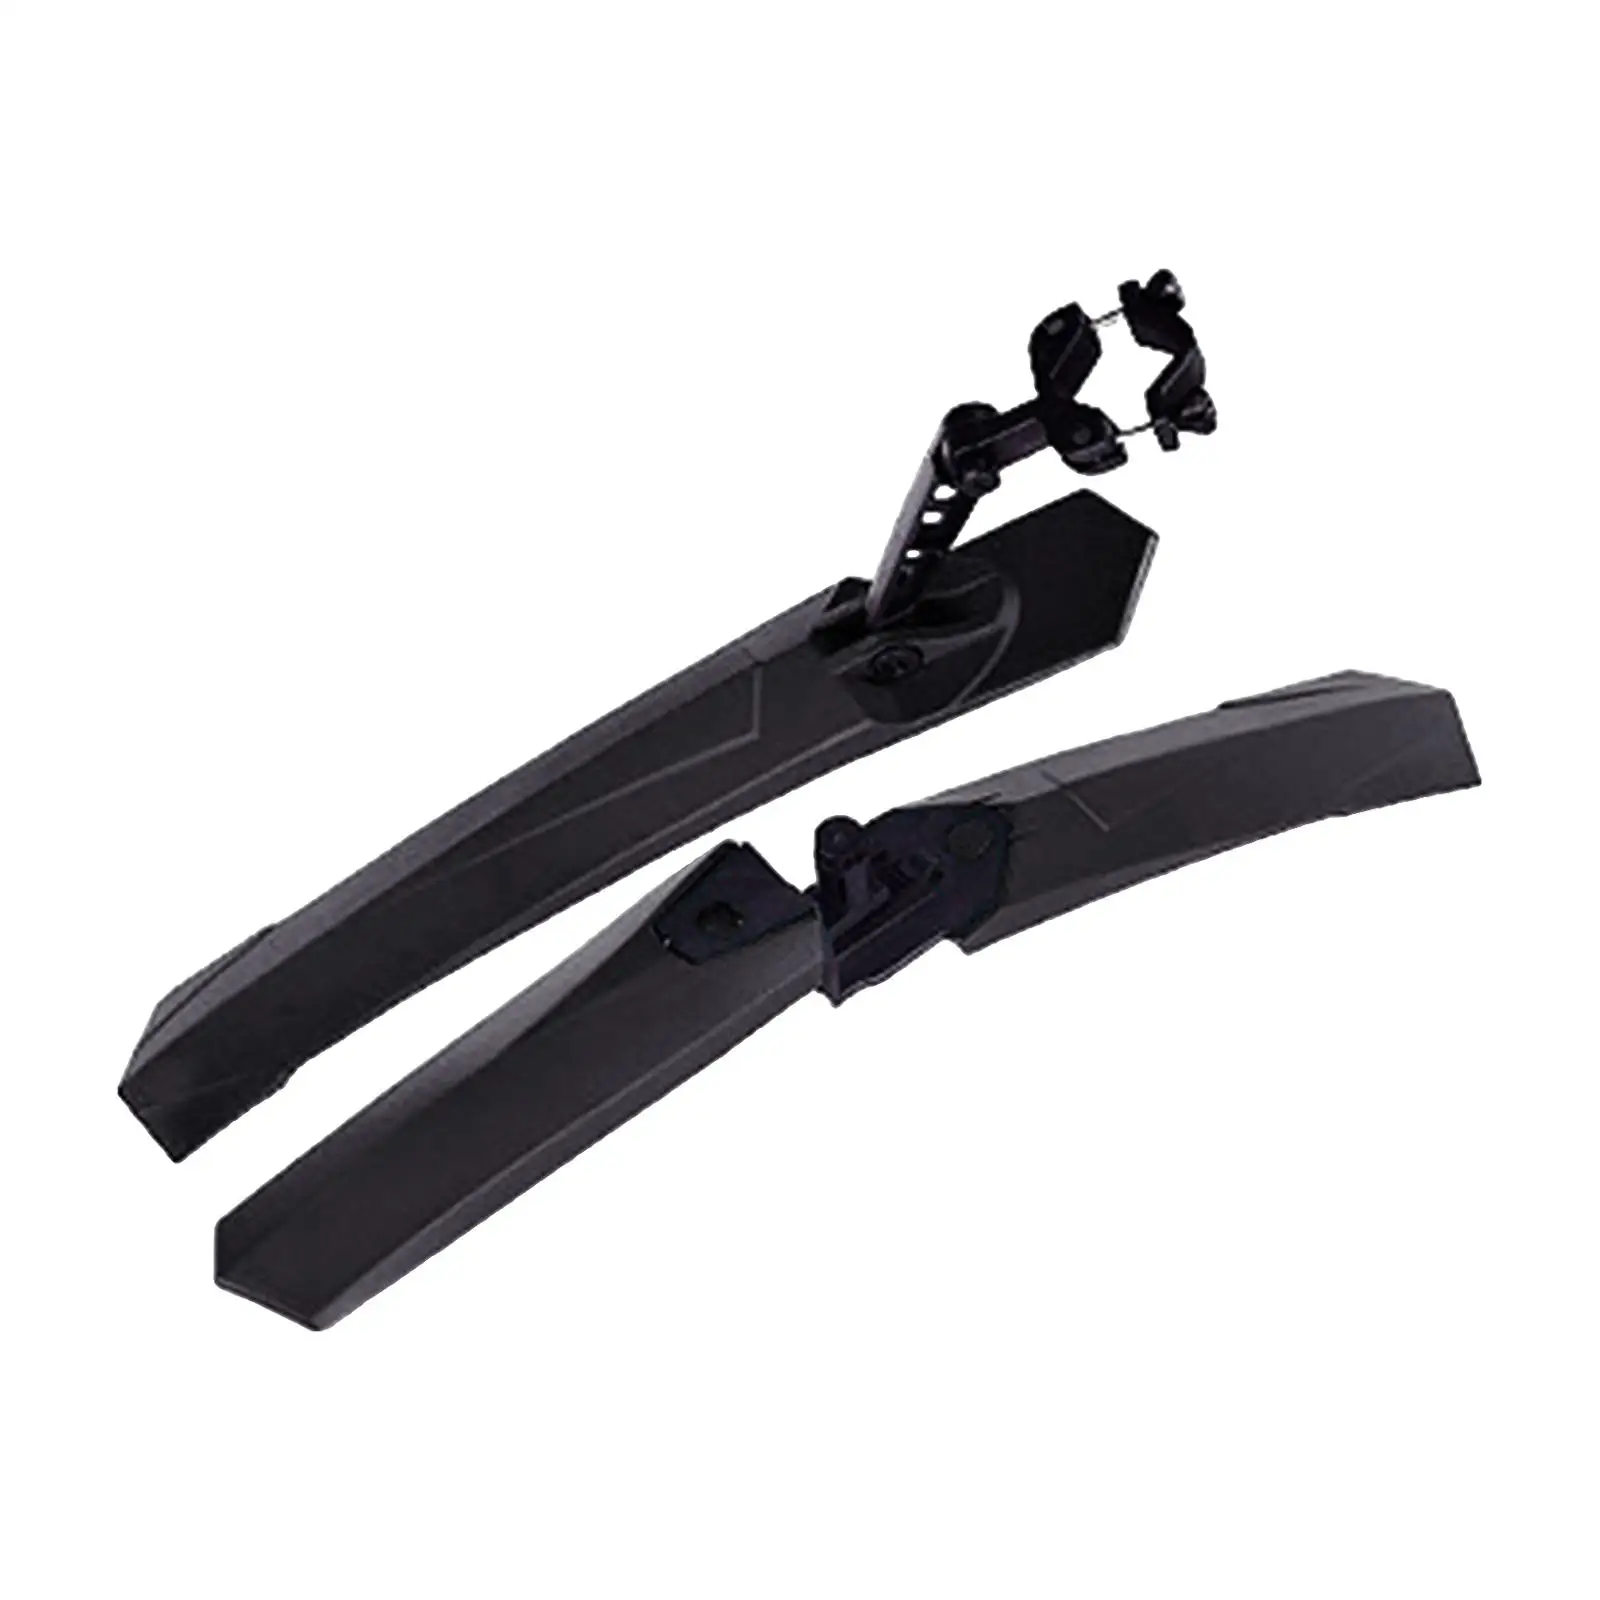 Bike Mudguard Front Rear Set Lengthen Widen Adjustable Mountain Bike Mud Guards for Cycling Outdoor Travel Replaces